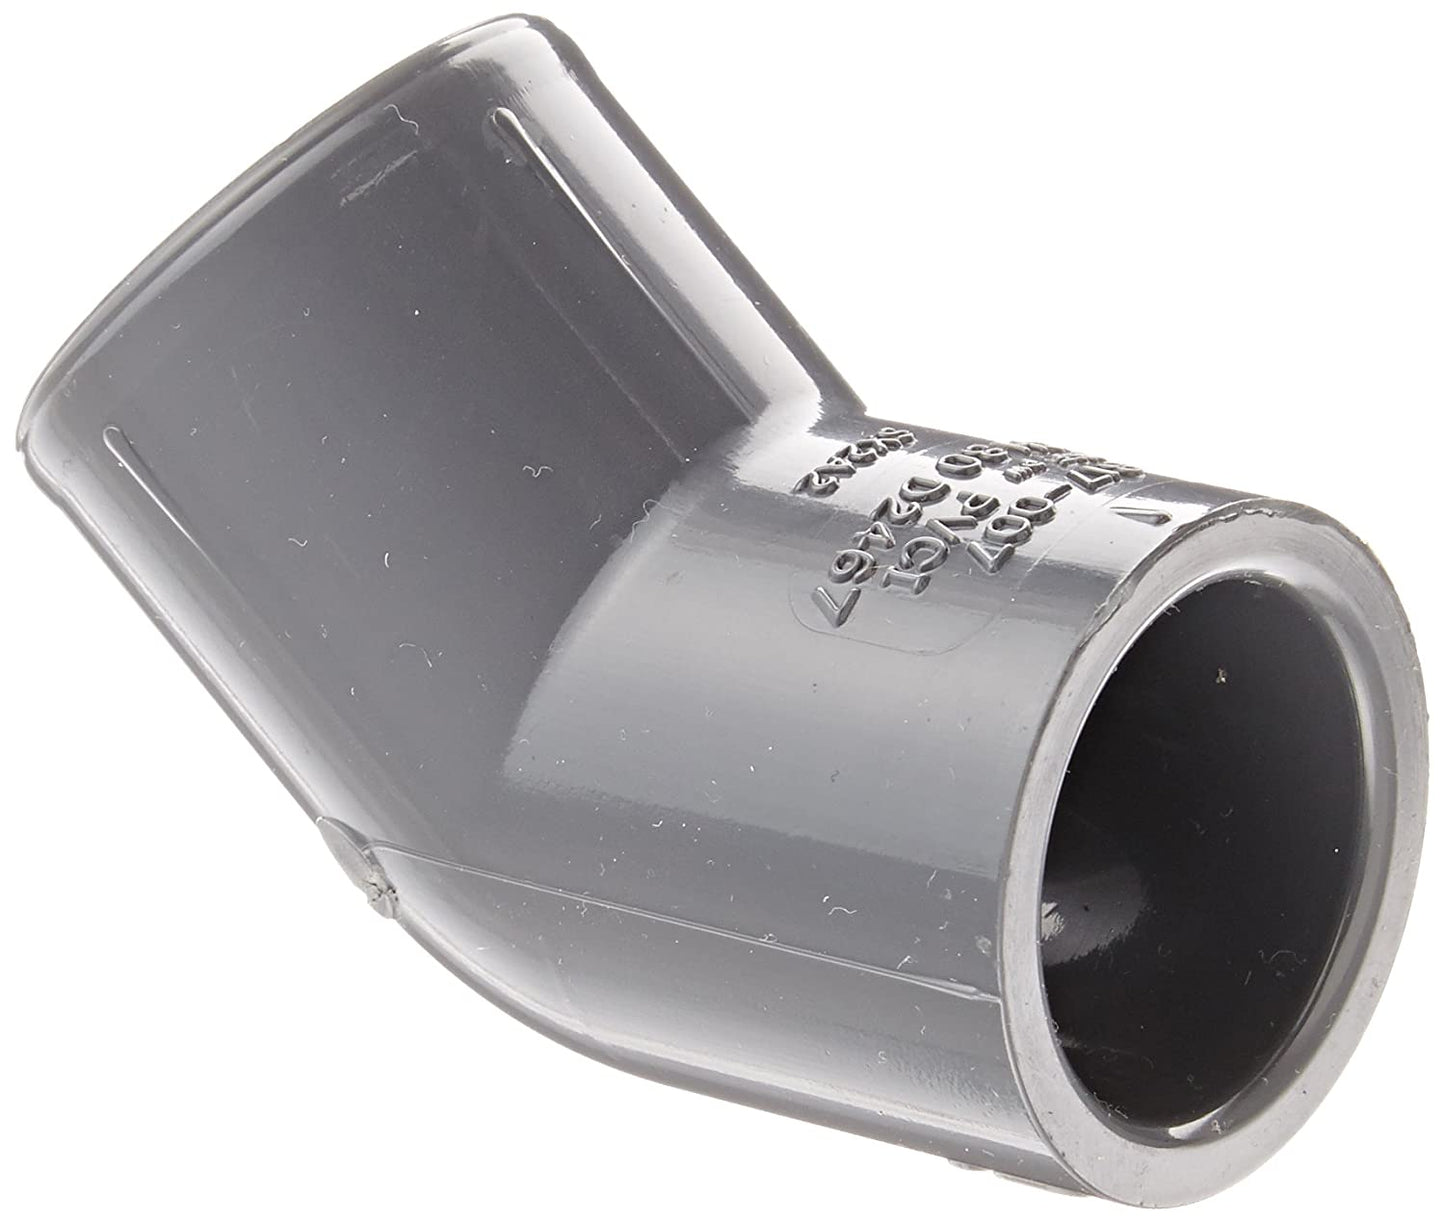 817-007 - PVC Pipe Fitting, 45 Degree Elbow, Schedule 80, 3/4" Socket